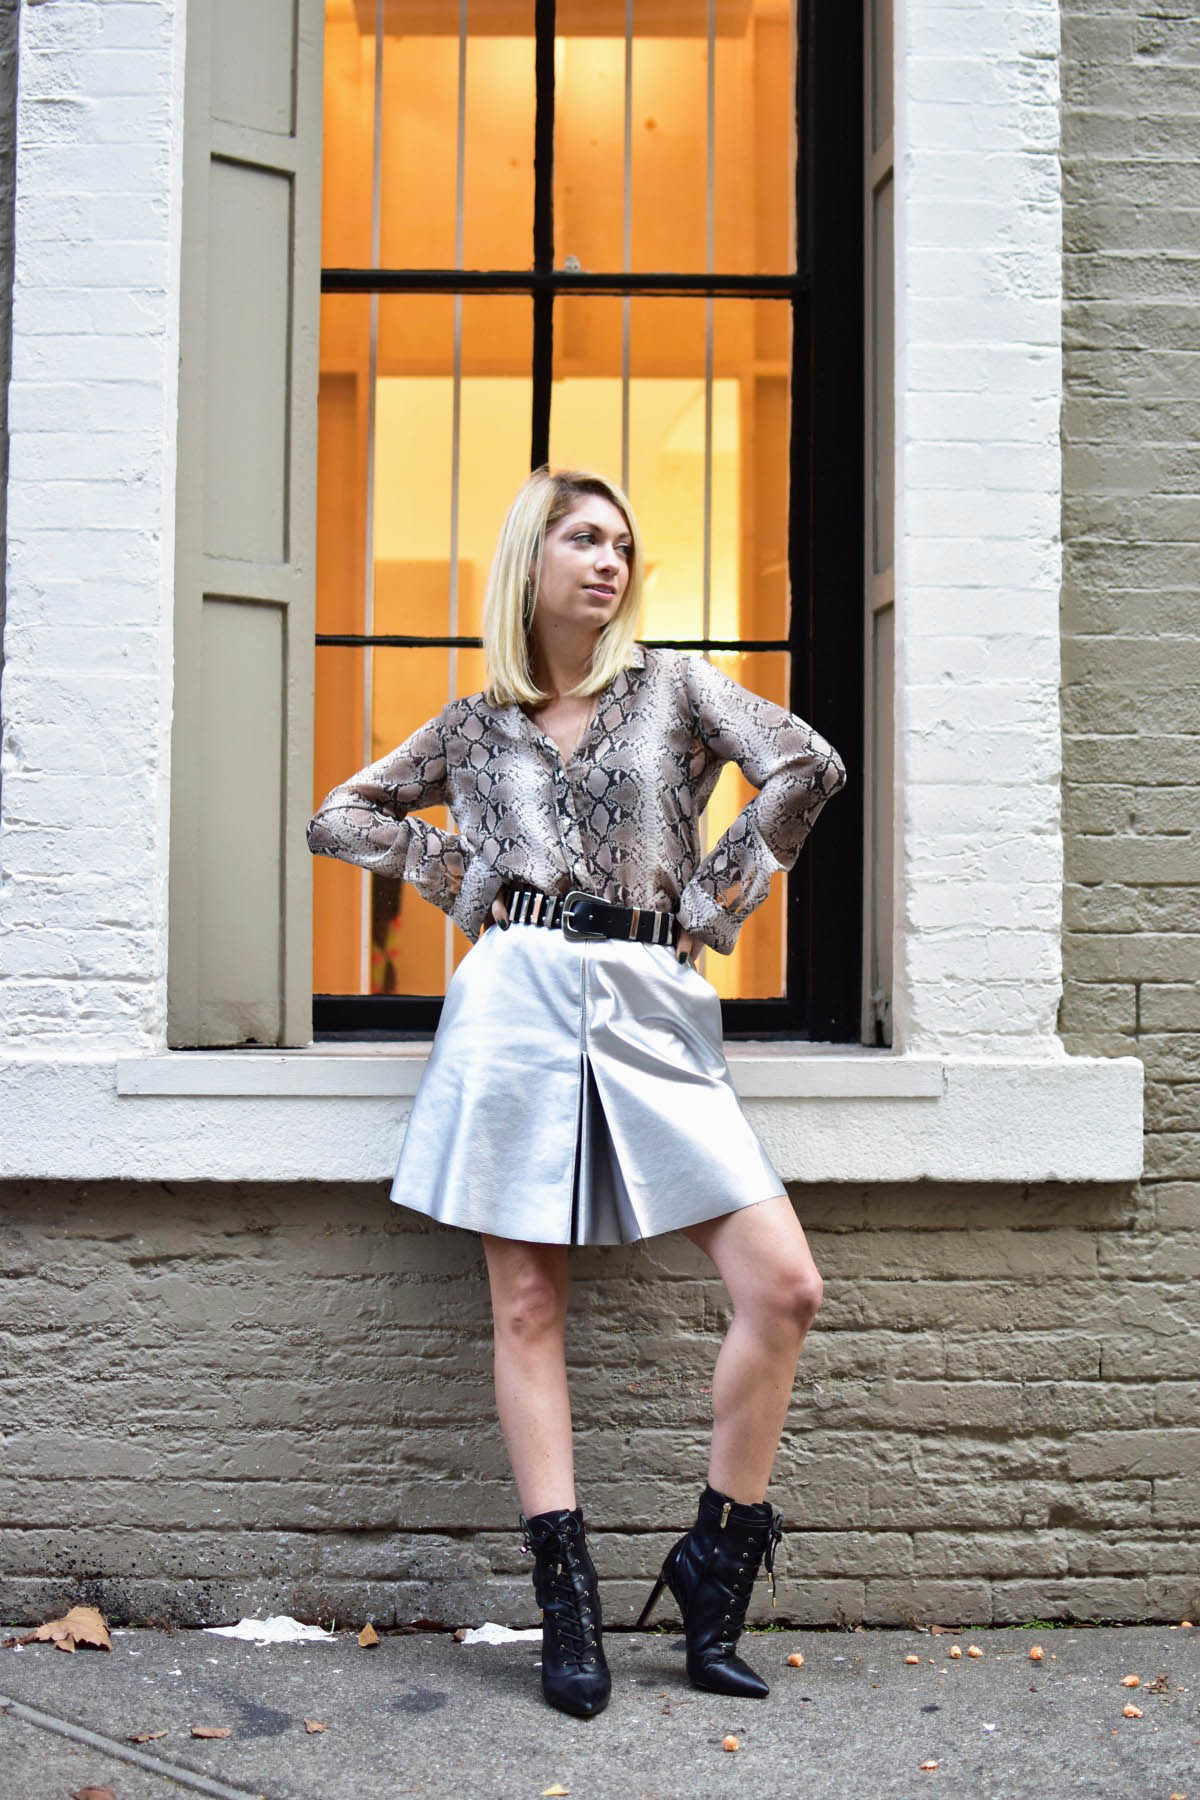 Designed by Stefanie- Silver Leather Skirt